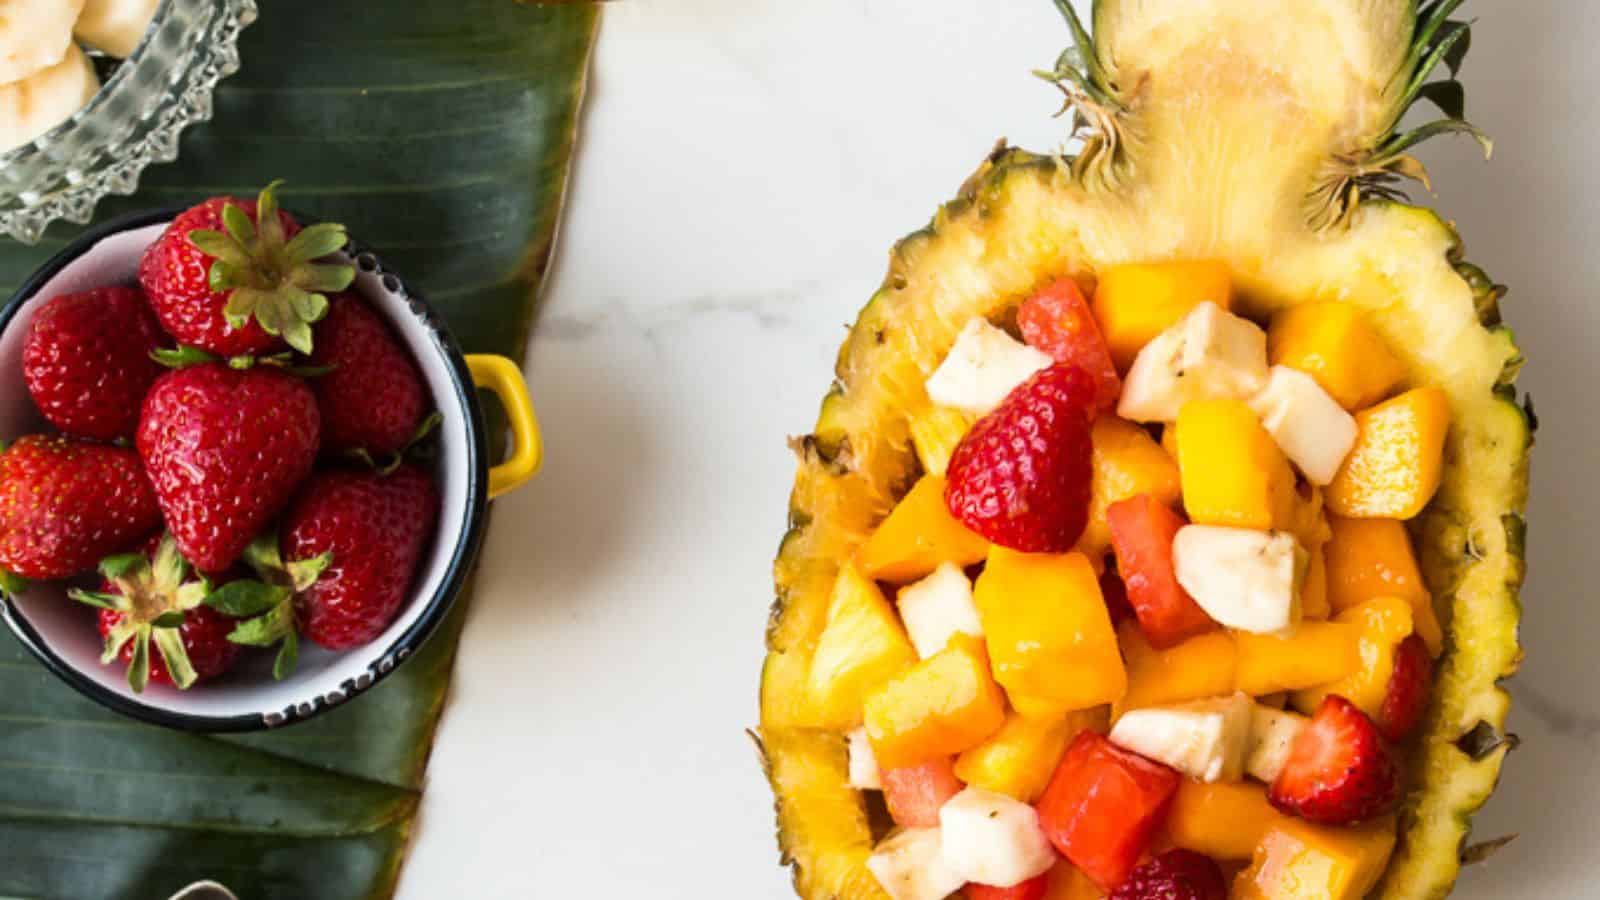 <p>Kickstart your day effortlessly with a burst of freshness-Lazy Morning Fruit Medley. Packed with vibrant fruits, it’s a no-fuss solution for your laziest mornings. Just chop, toss, and enjoy a delicious medley of tropical flavors.<br><strong>Get the Recipe: </strong><a href="https://immigrantstable.com/colombian-fruit-salad-ensalada-de-frutas-colombiana-vegan/?utm_source=msn&utm_medium=page&utm_campaign=18 extremely quick and easy breakfast ideas for lazy people">Lazy Morning Fruit Medley</a></p>